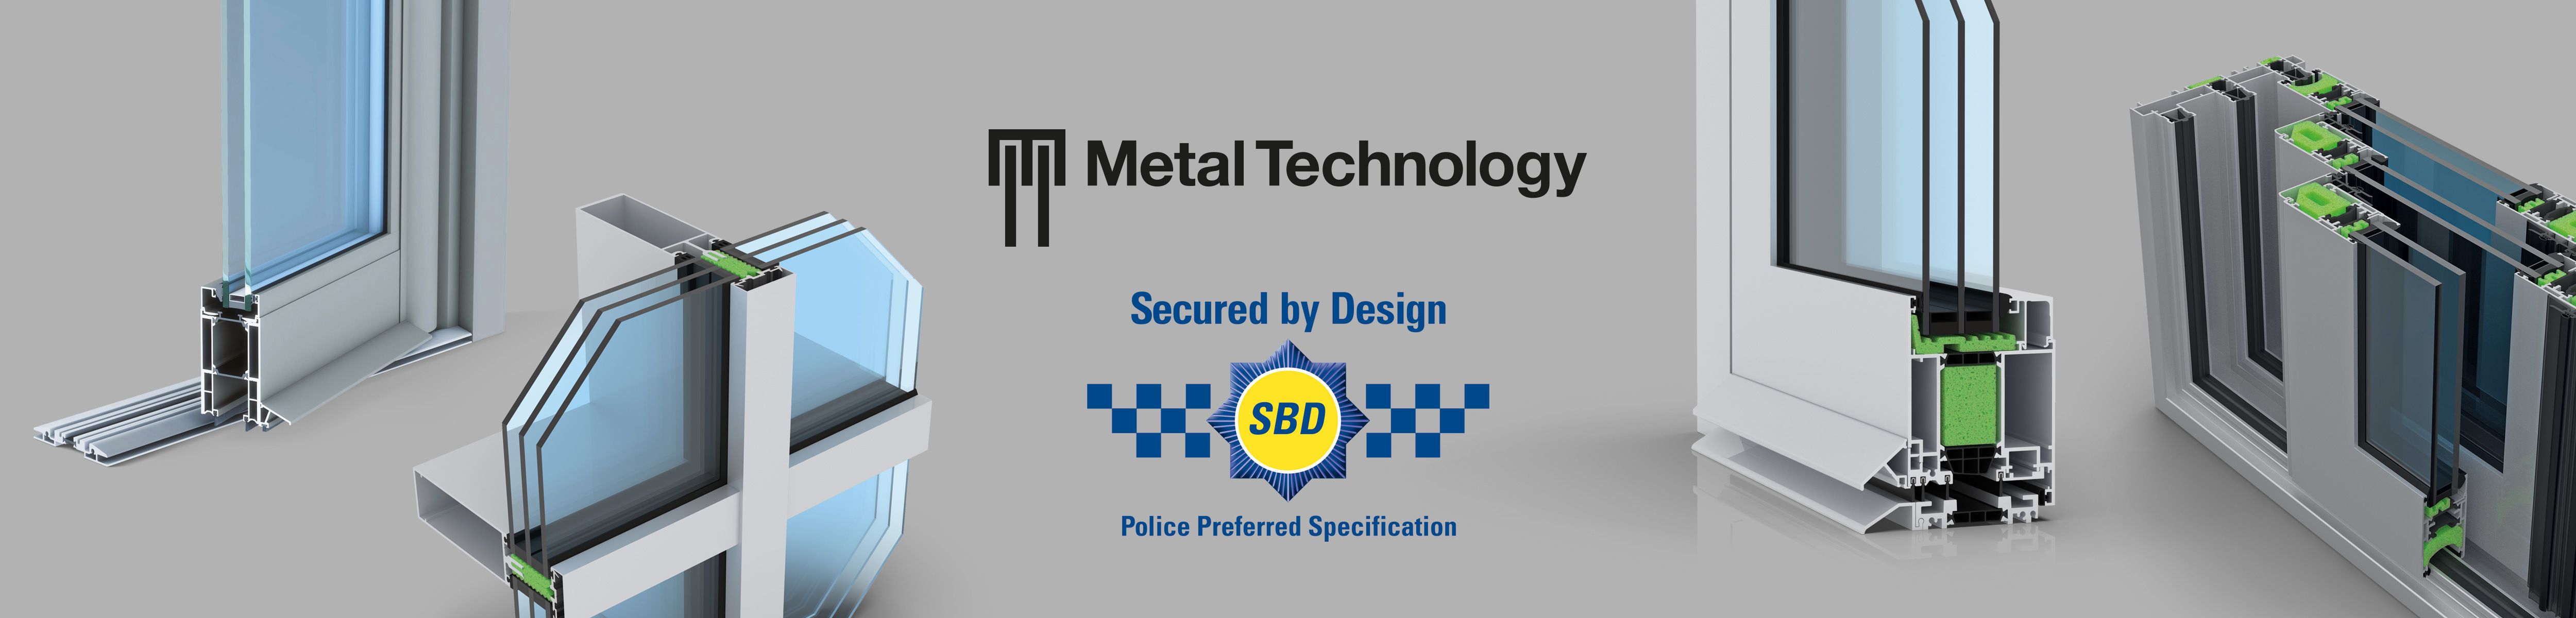 Metal Technology continue their longstanding membership with Secured by Design